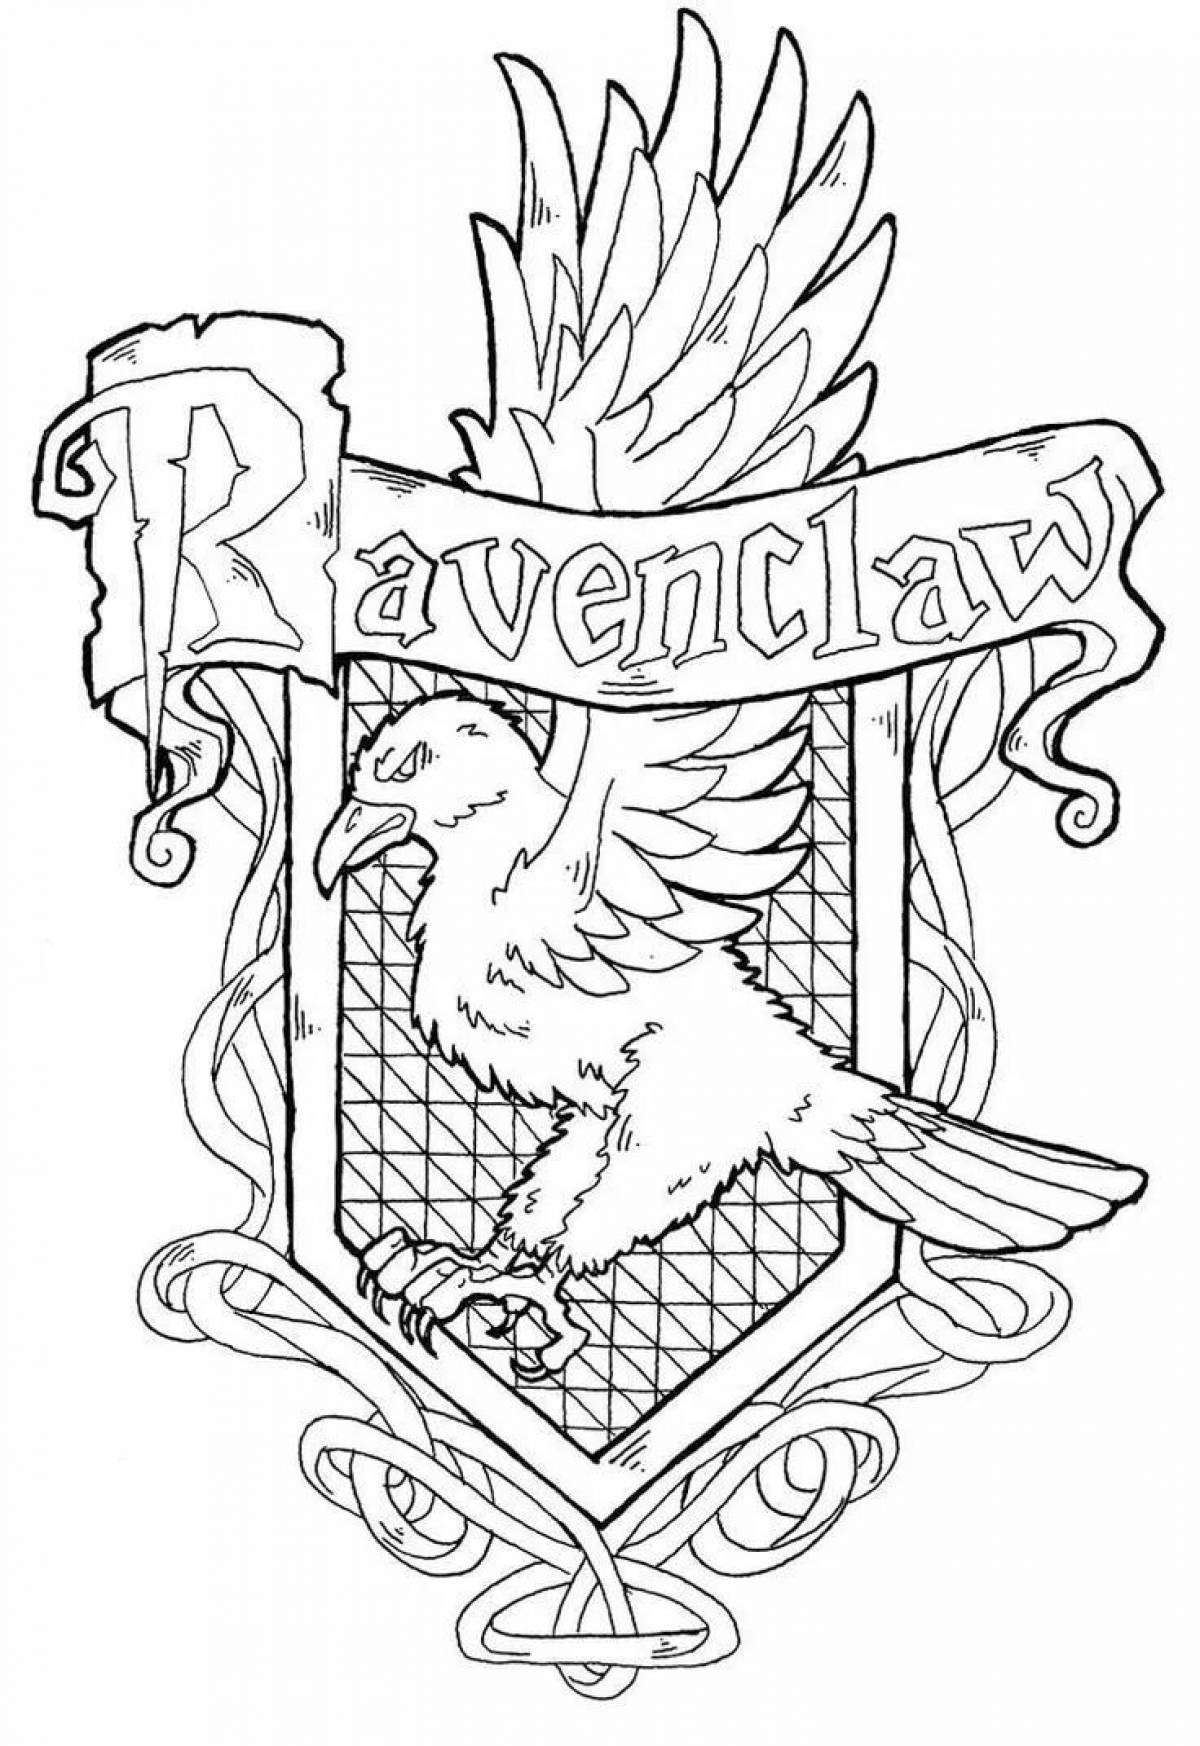 Lucky Slytherin coloring pages